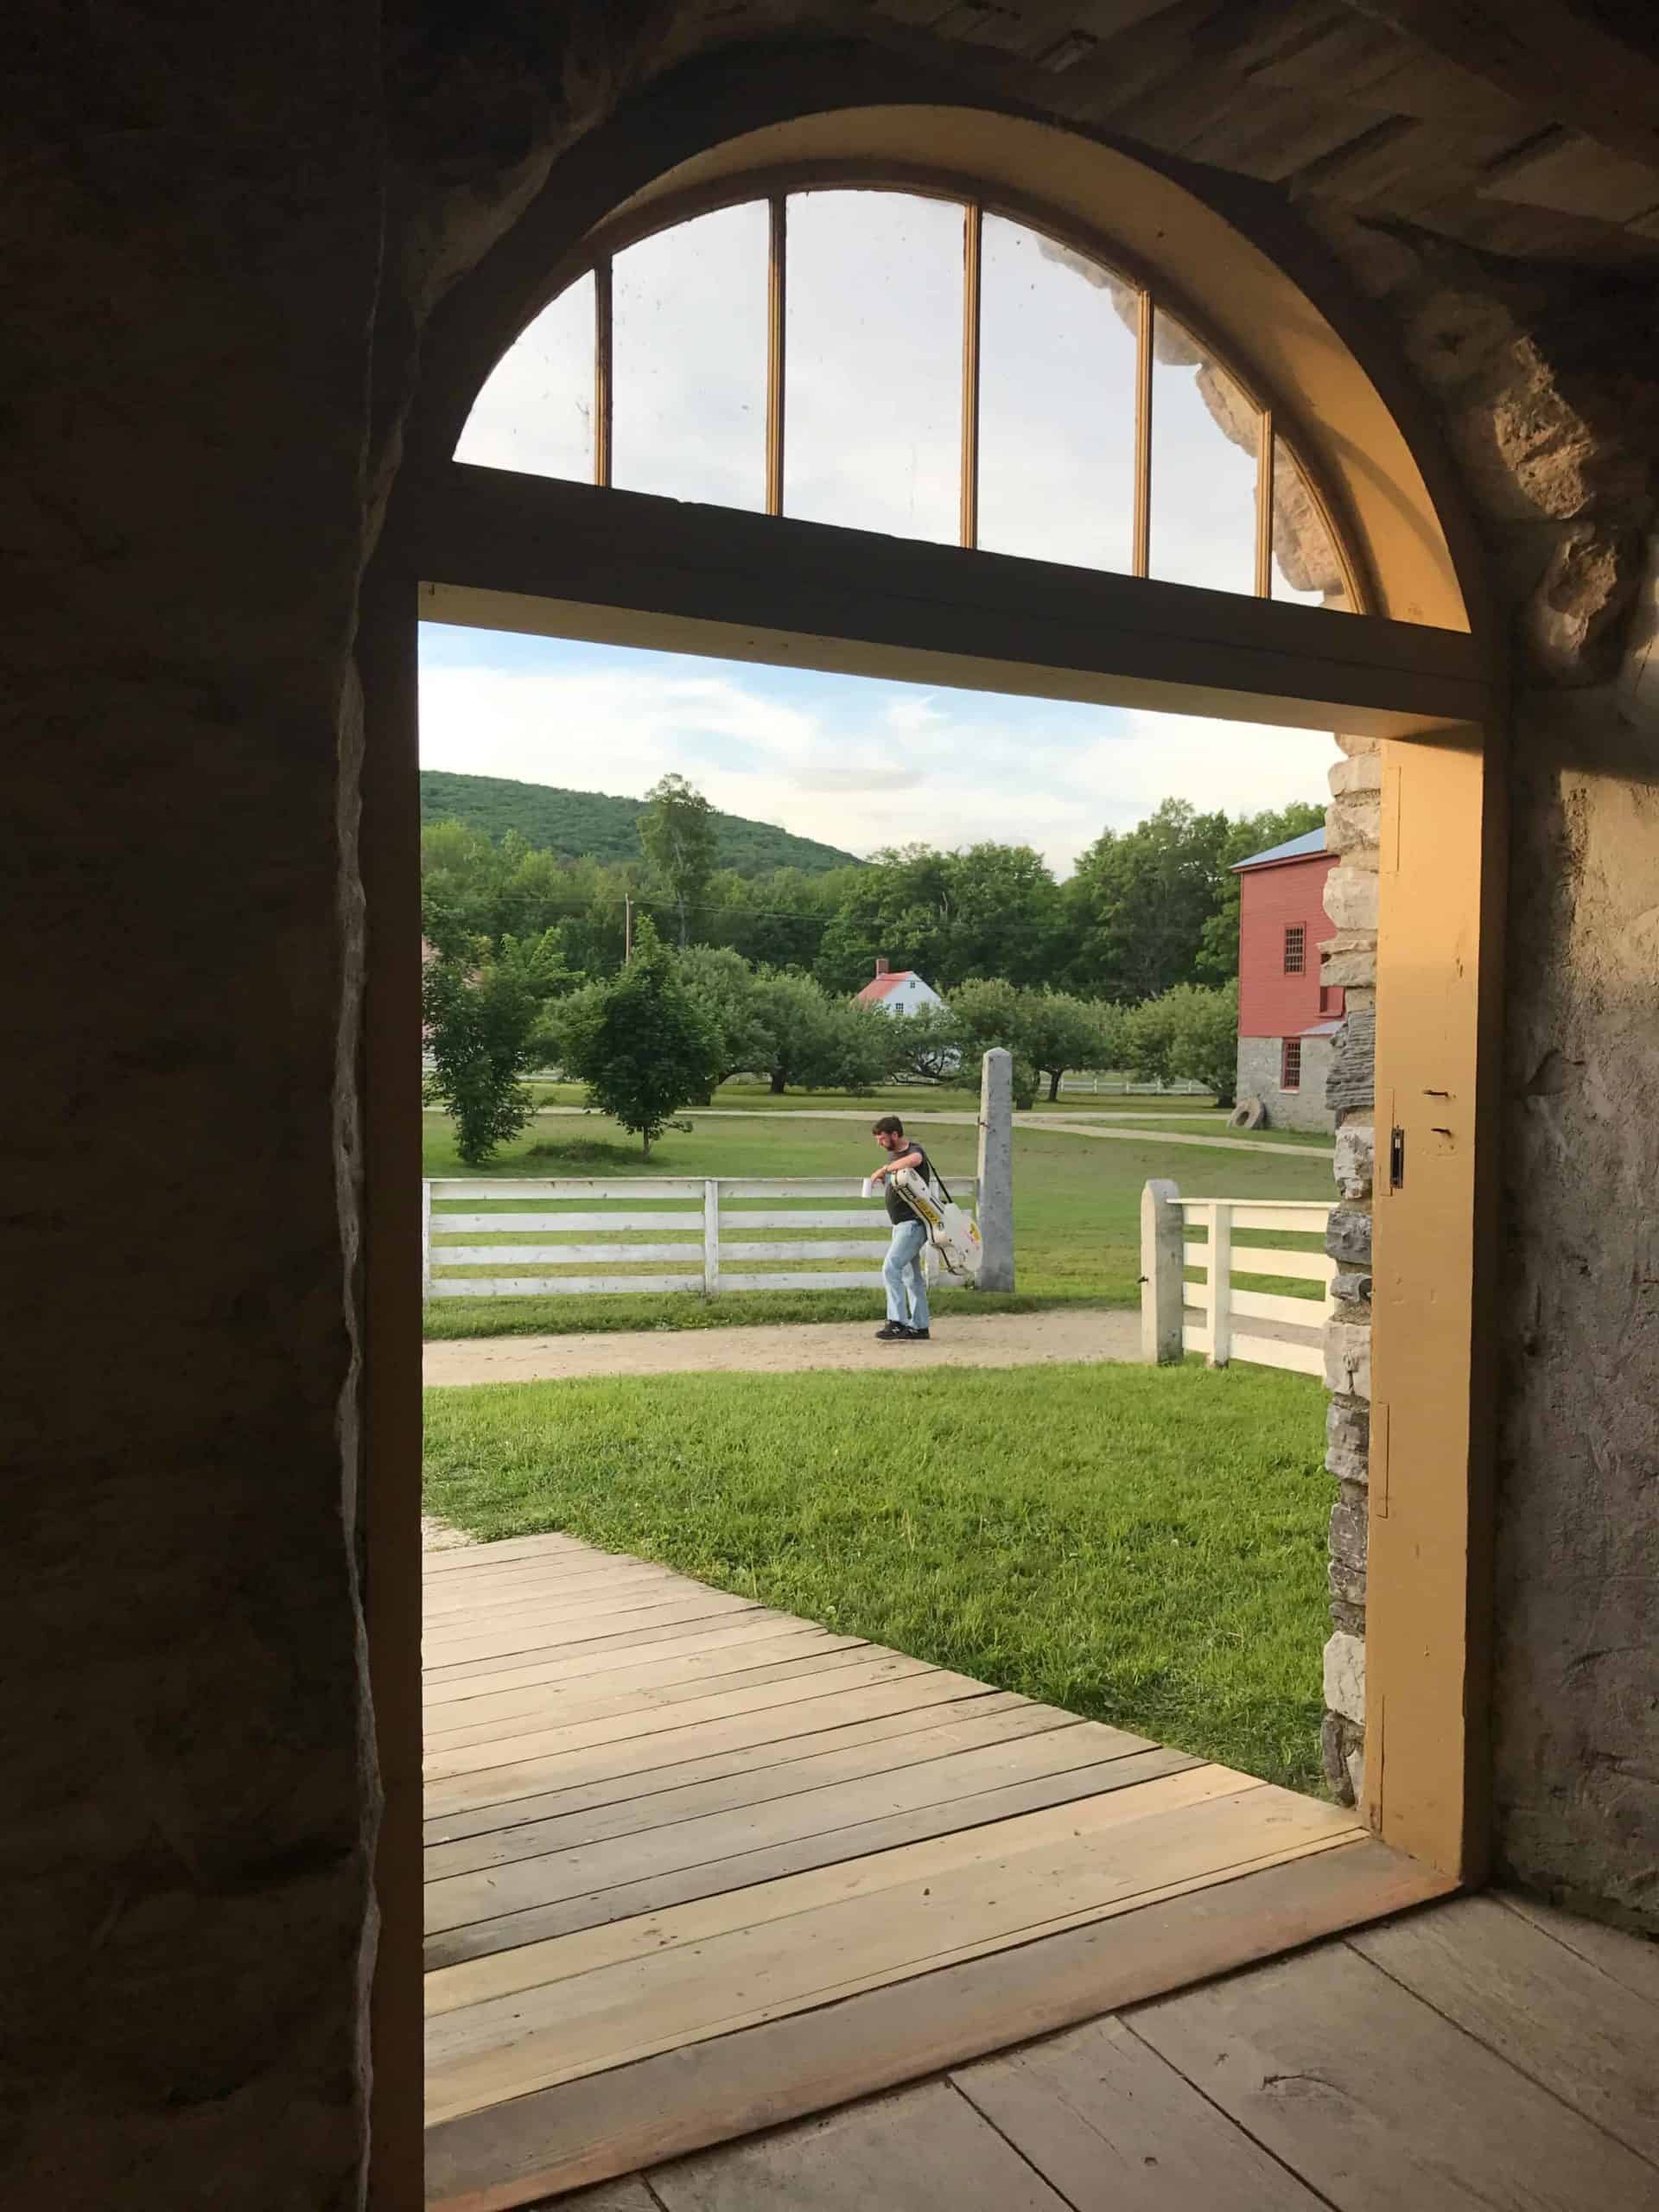 A musician walks by the round stone barn.